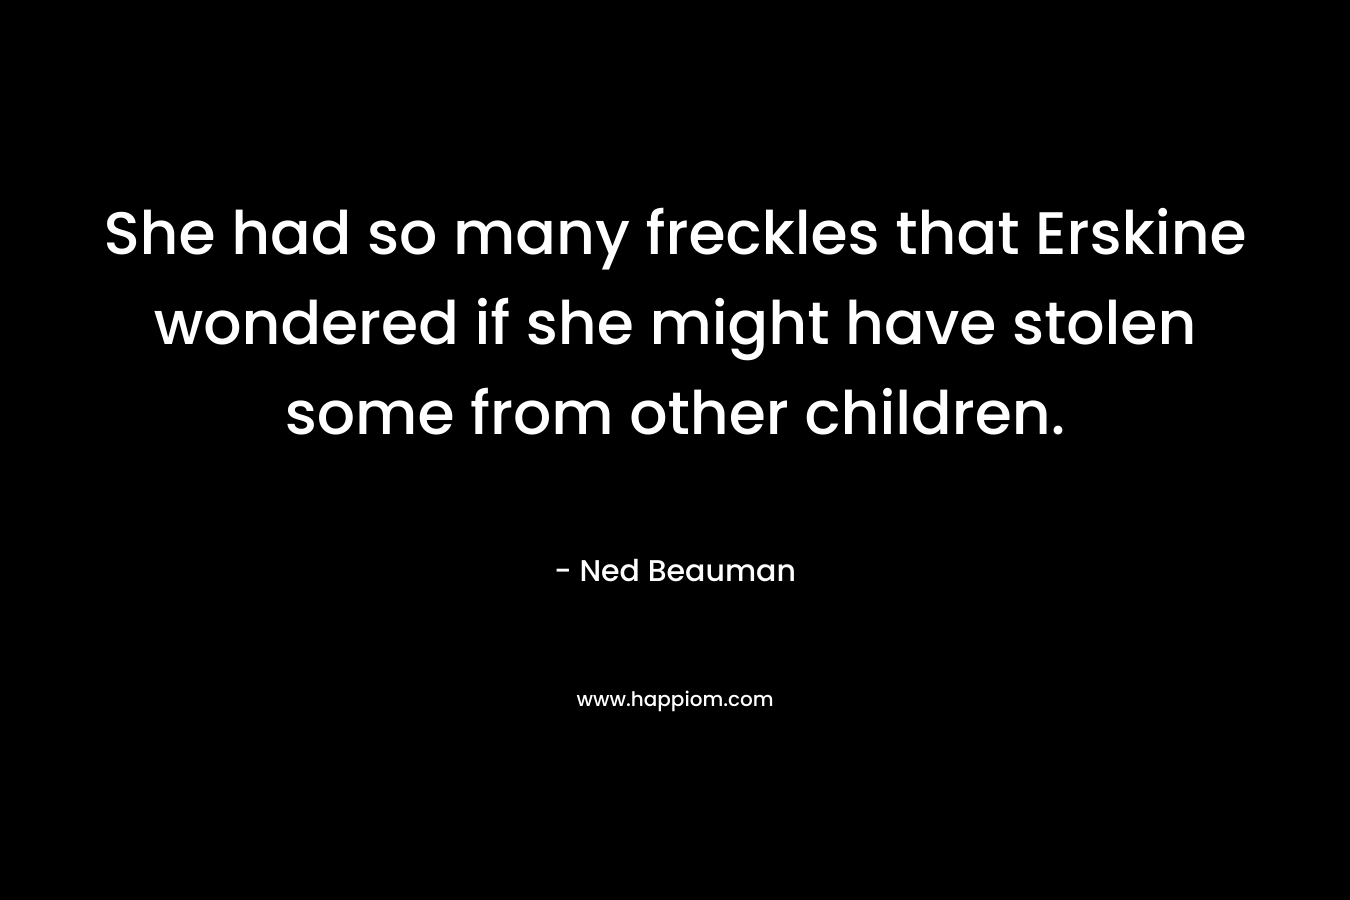 She had so many freckles that Erskine wondered if she might have stolen some from other children.